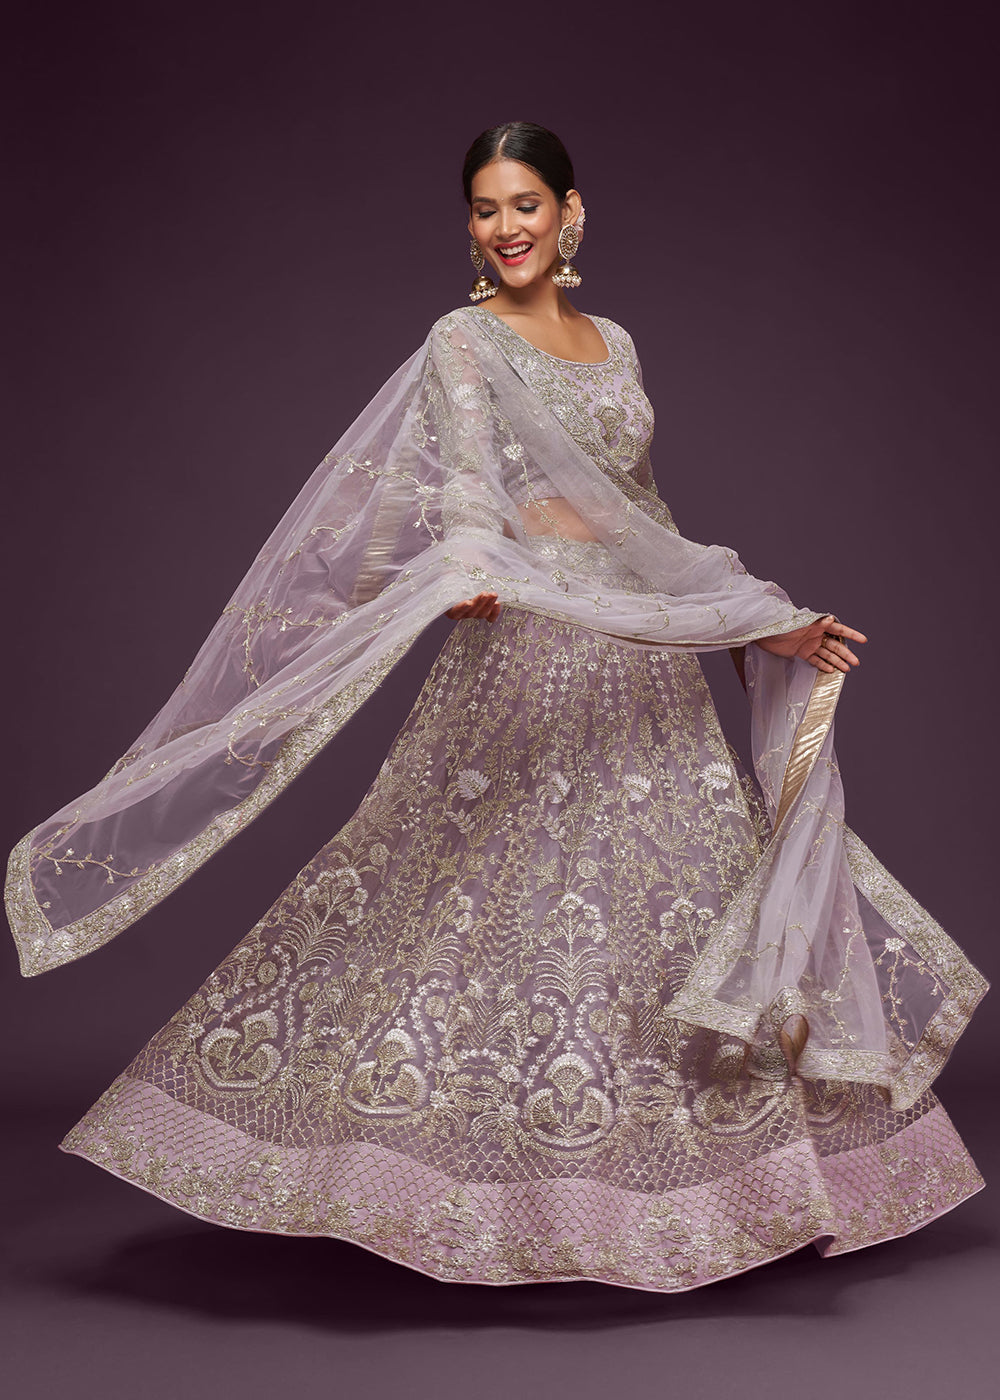 Shop Dusky Blue Satin and Organza Contemporary Lehenga Online in USA – Pure  Elegance